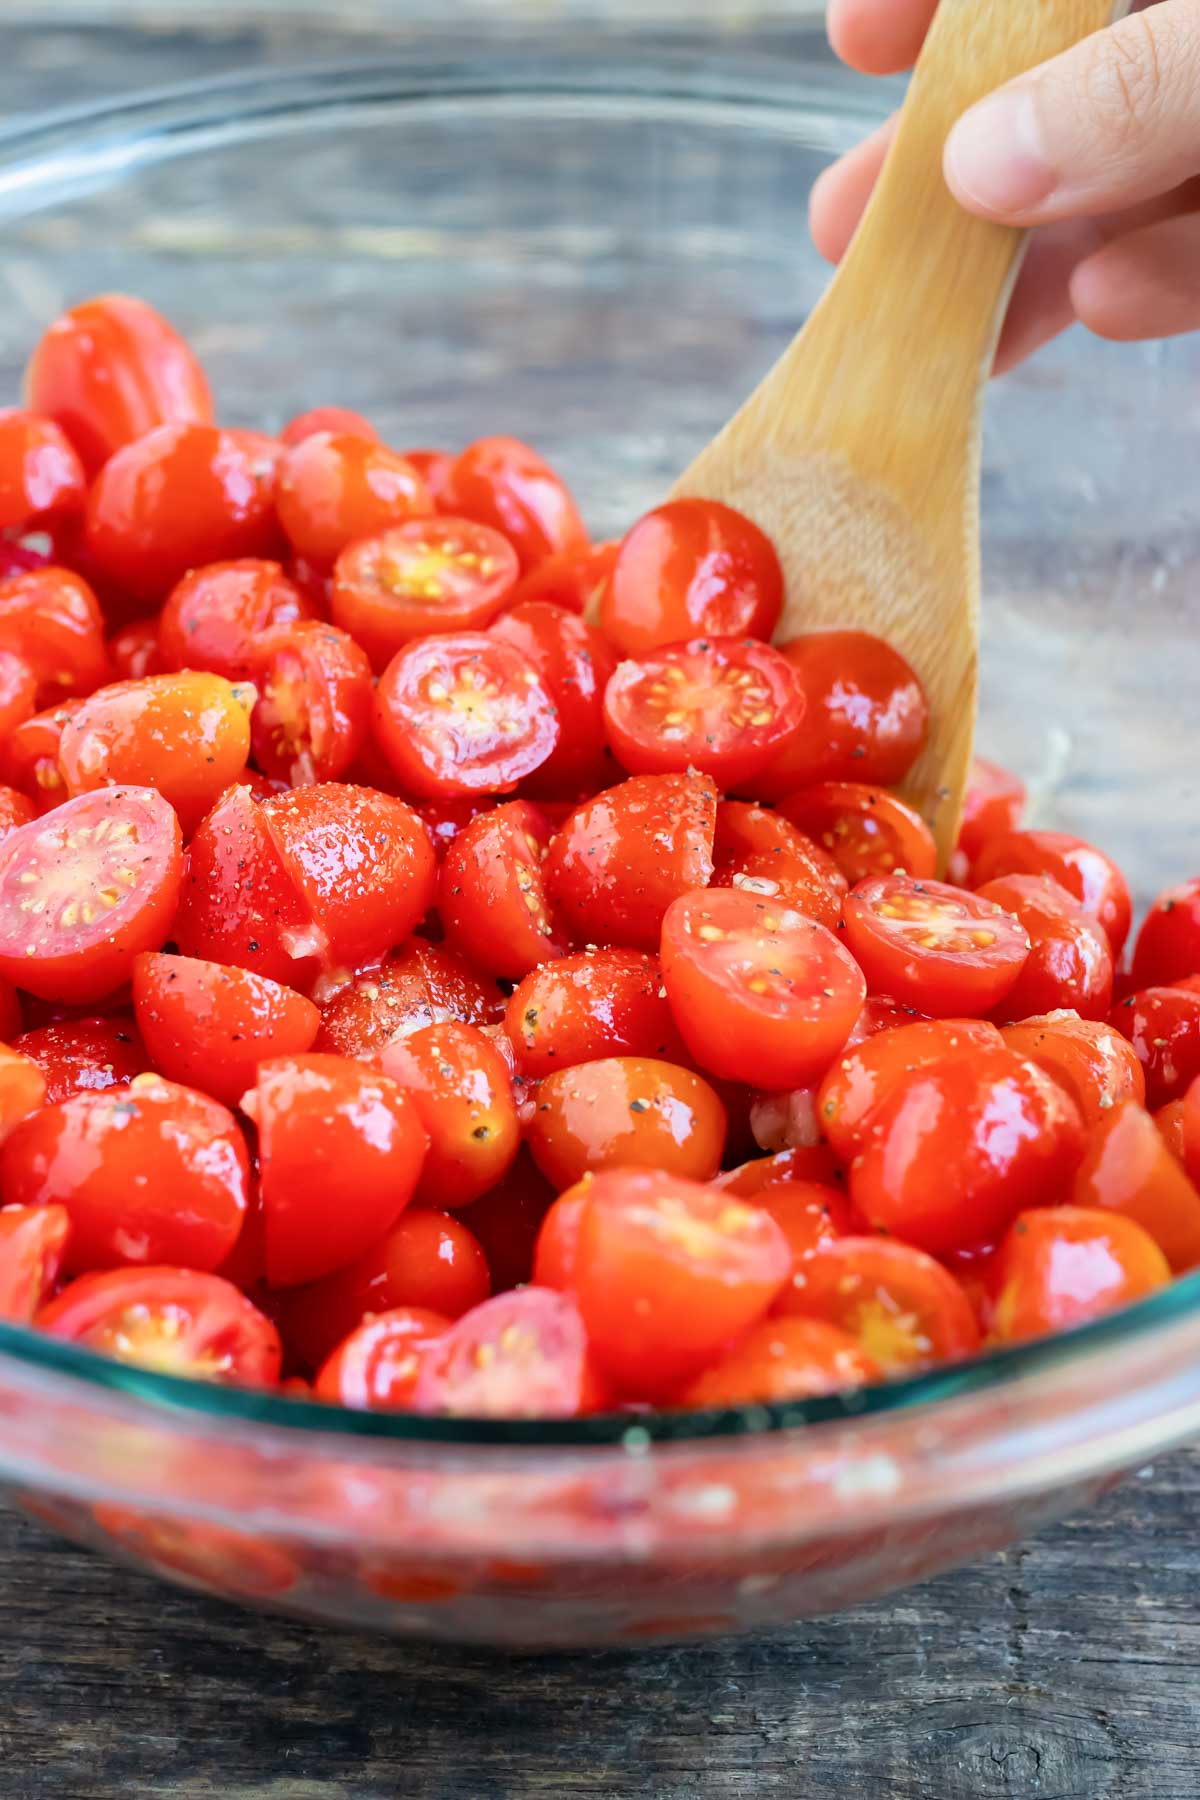 A wooden spoon stirs sliced tomatoes with seasoning.